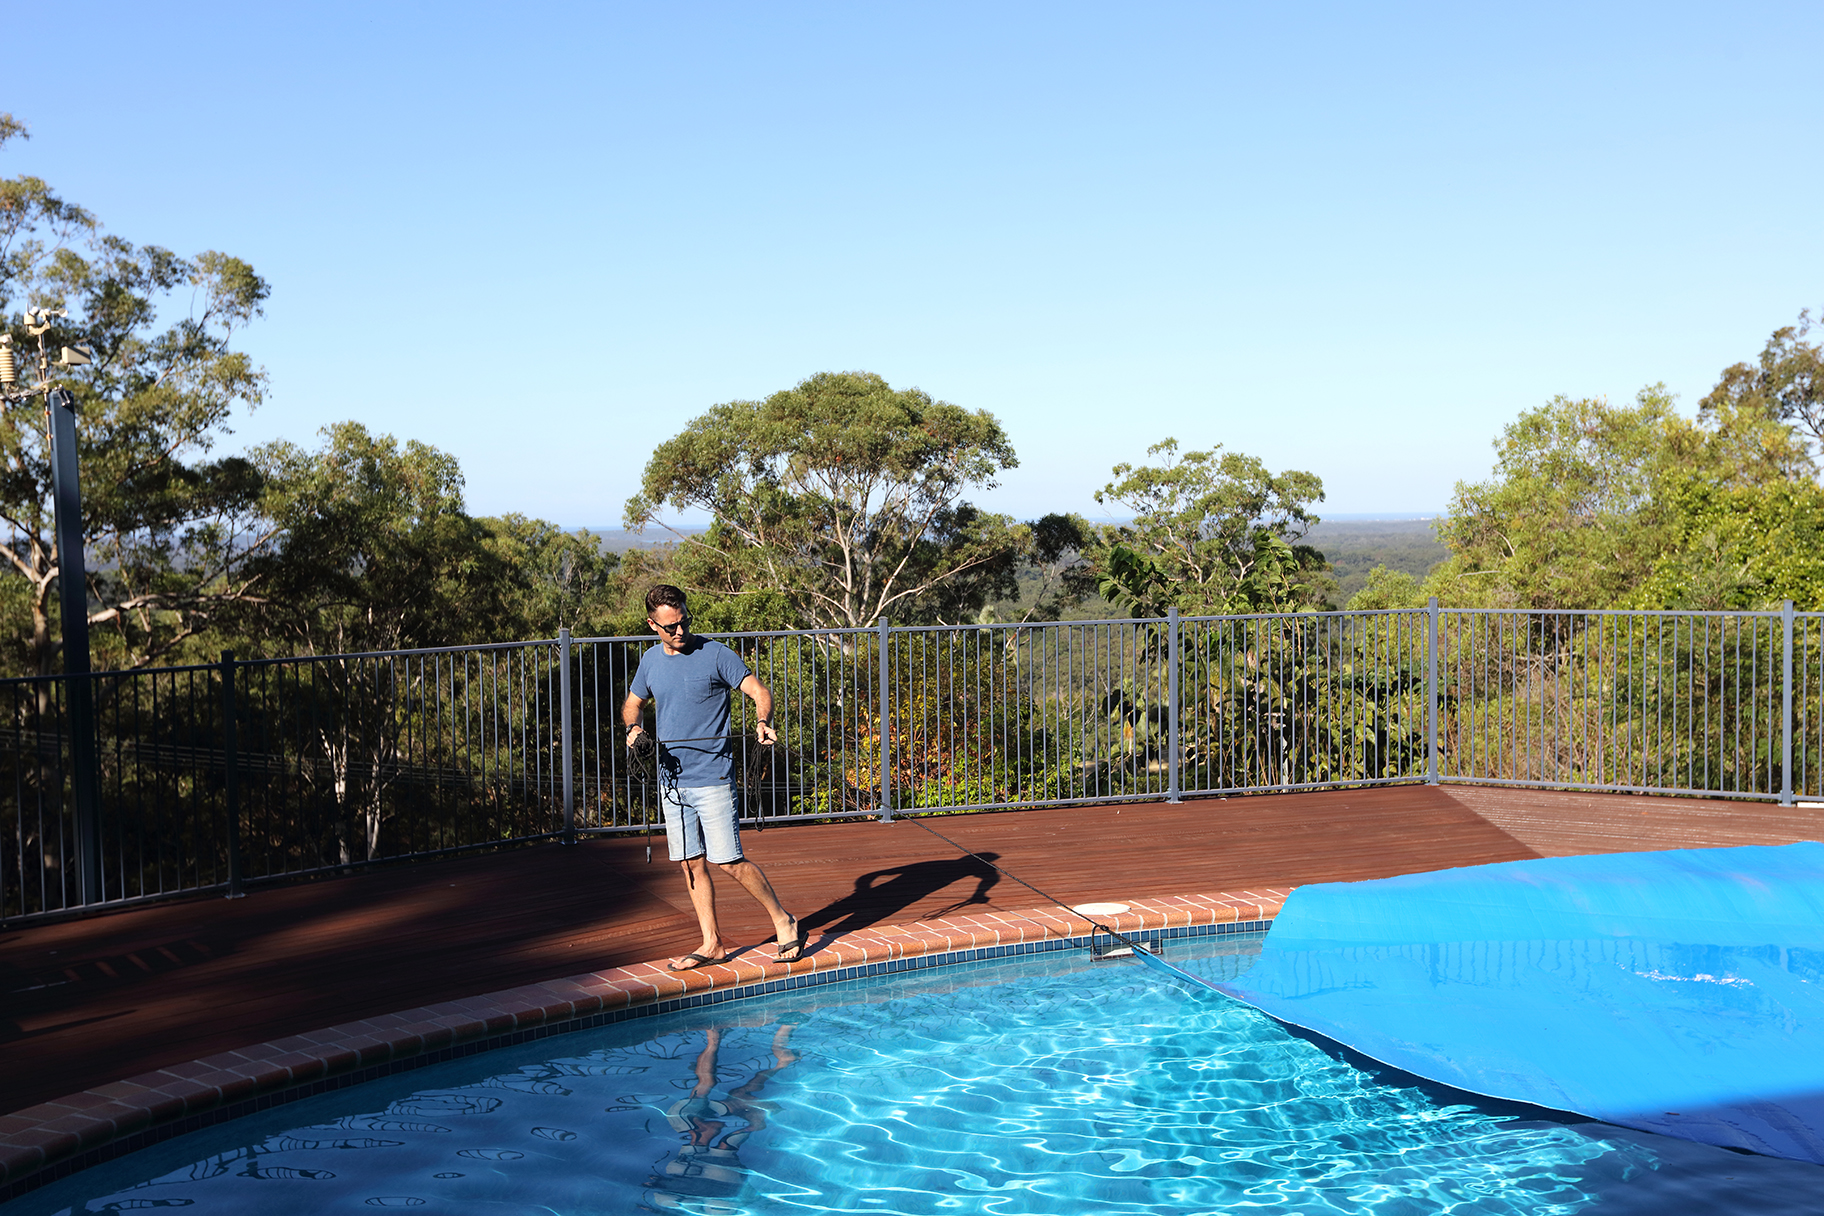 Man covering residential pool with blue tarp